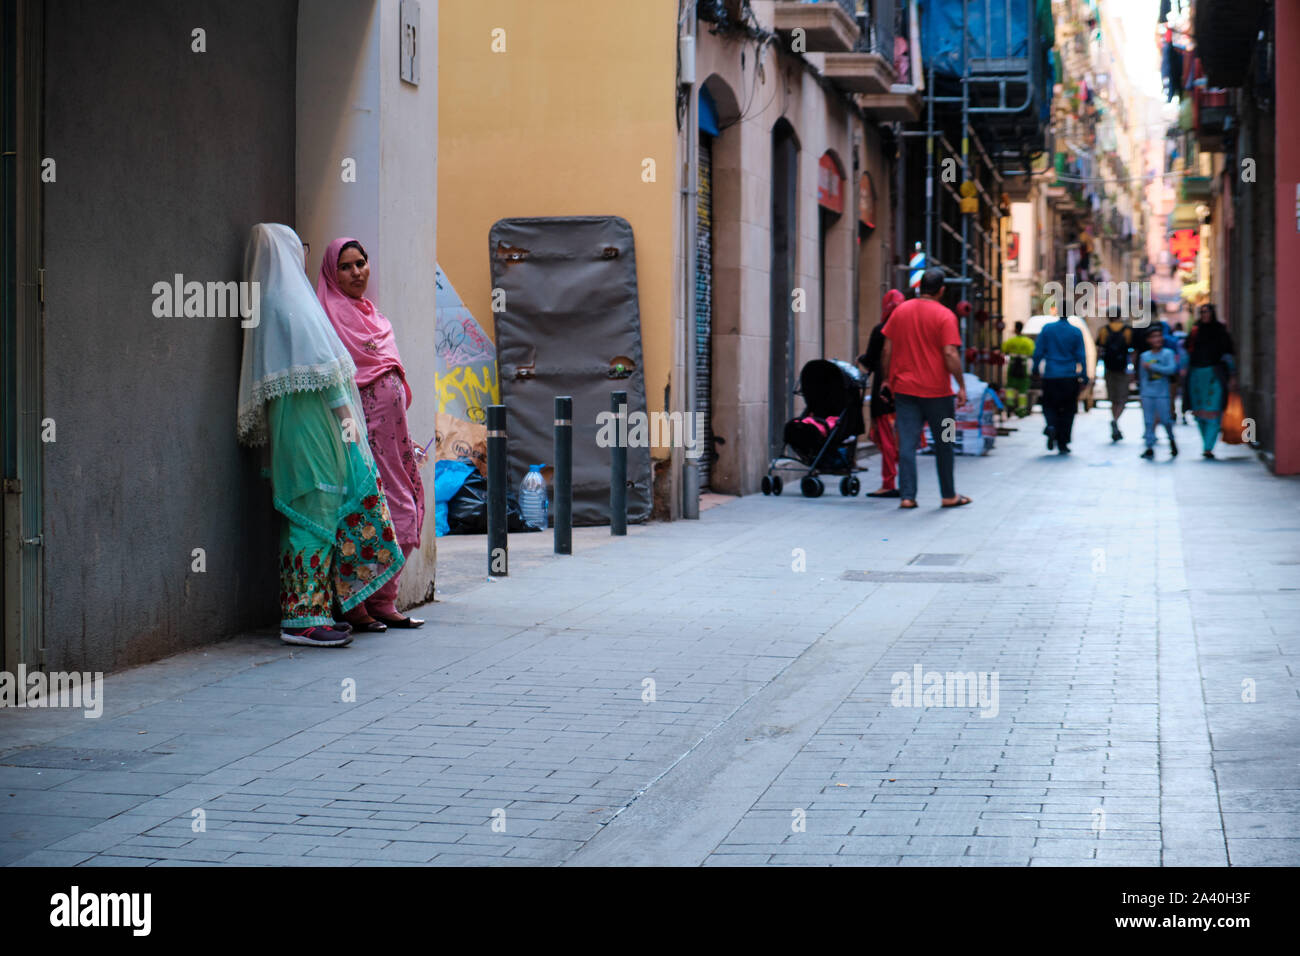 Streetlife of El Raval - Impressions from Barcelona Stock Photo